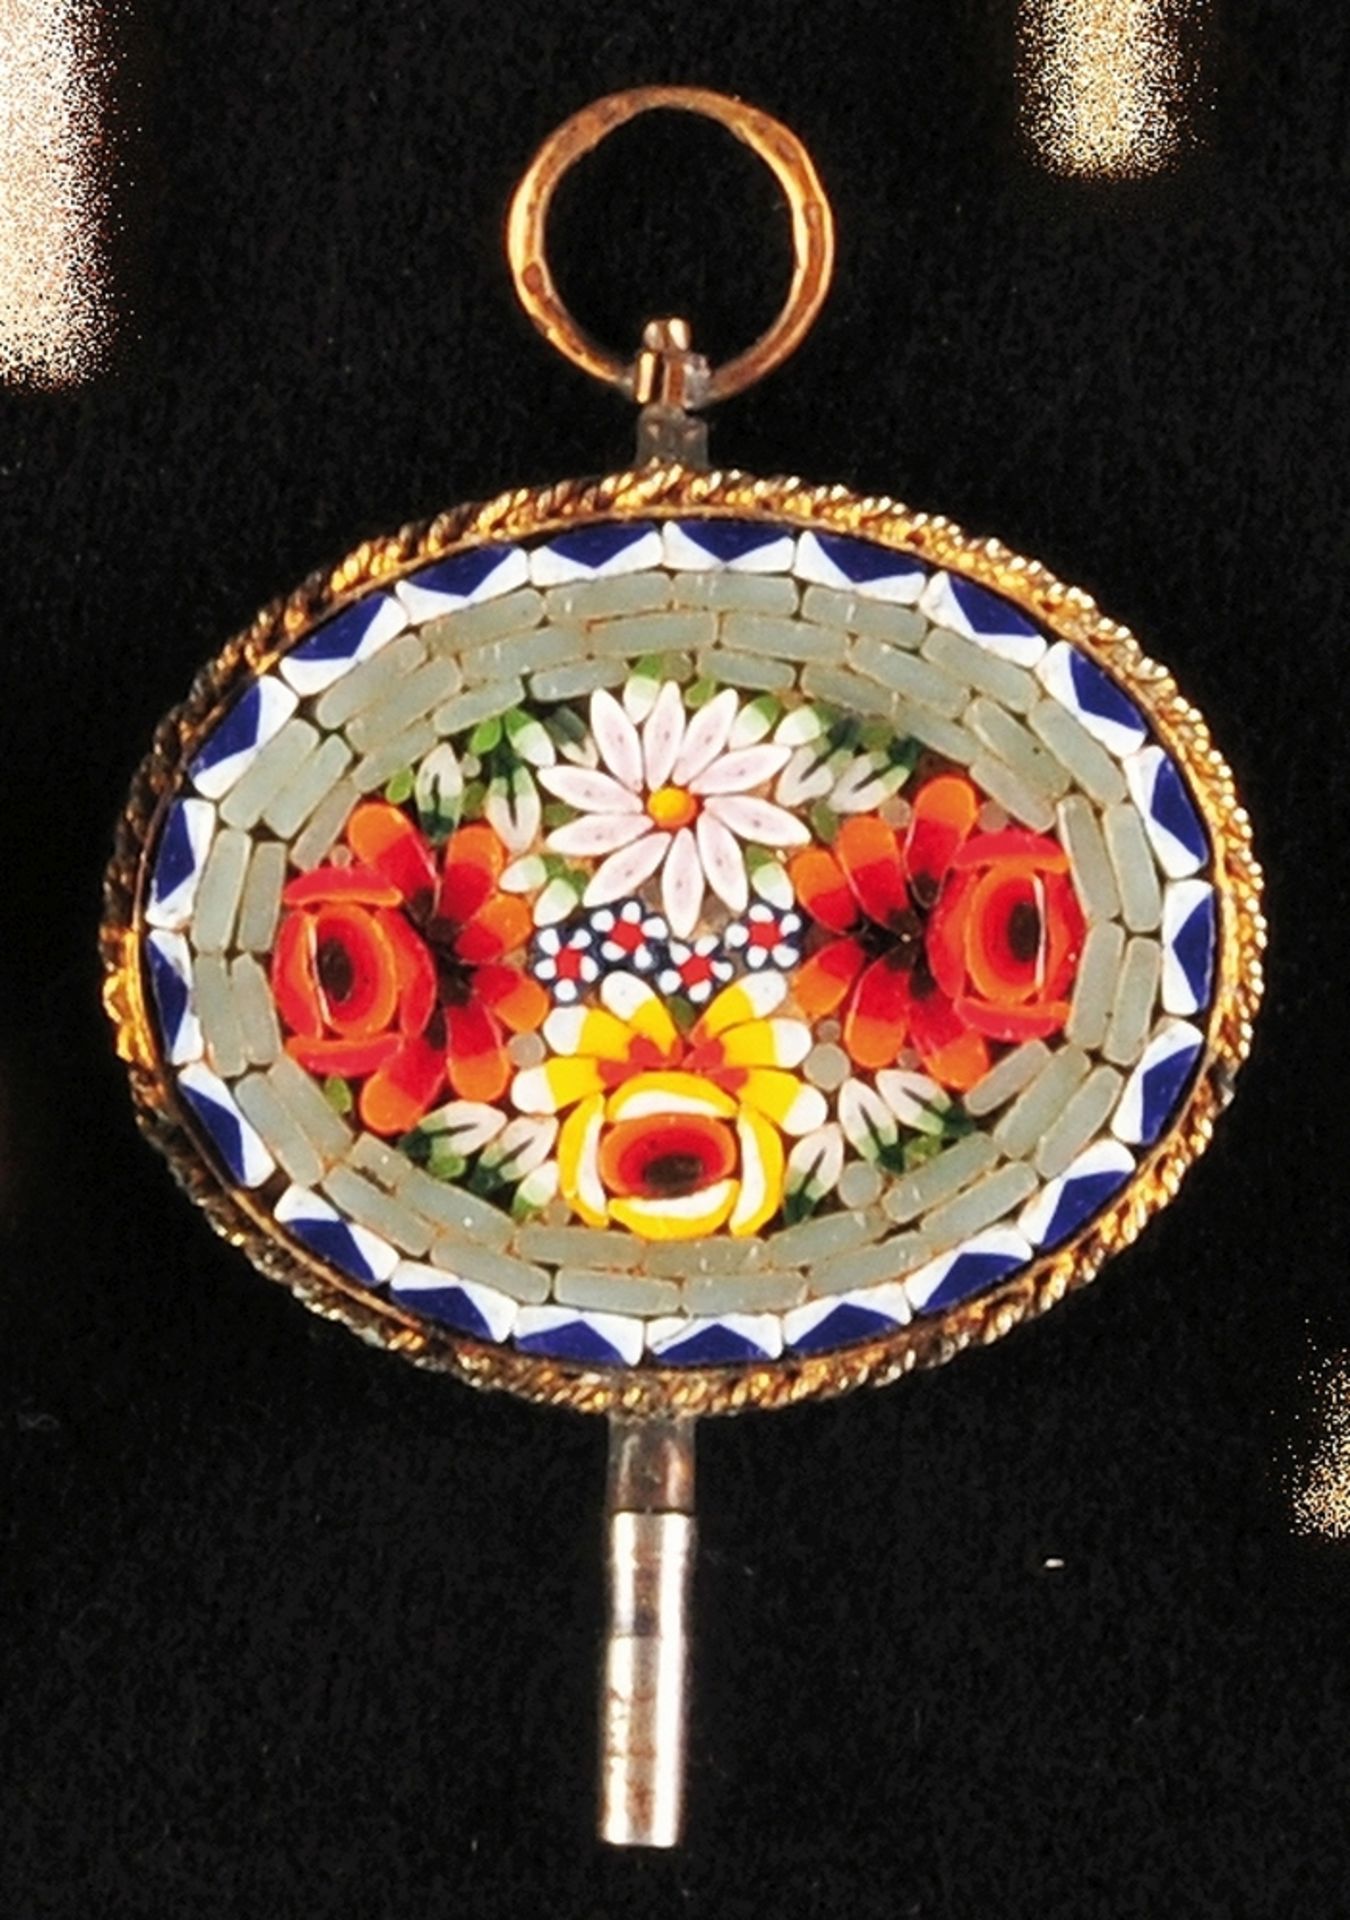 Mosaic pocket watch key in gilded setting, oval plate with colorful mosaic with flower decoration